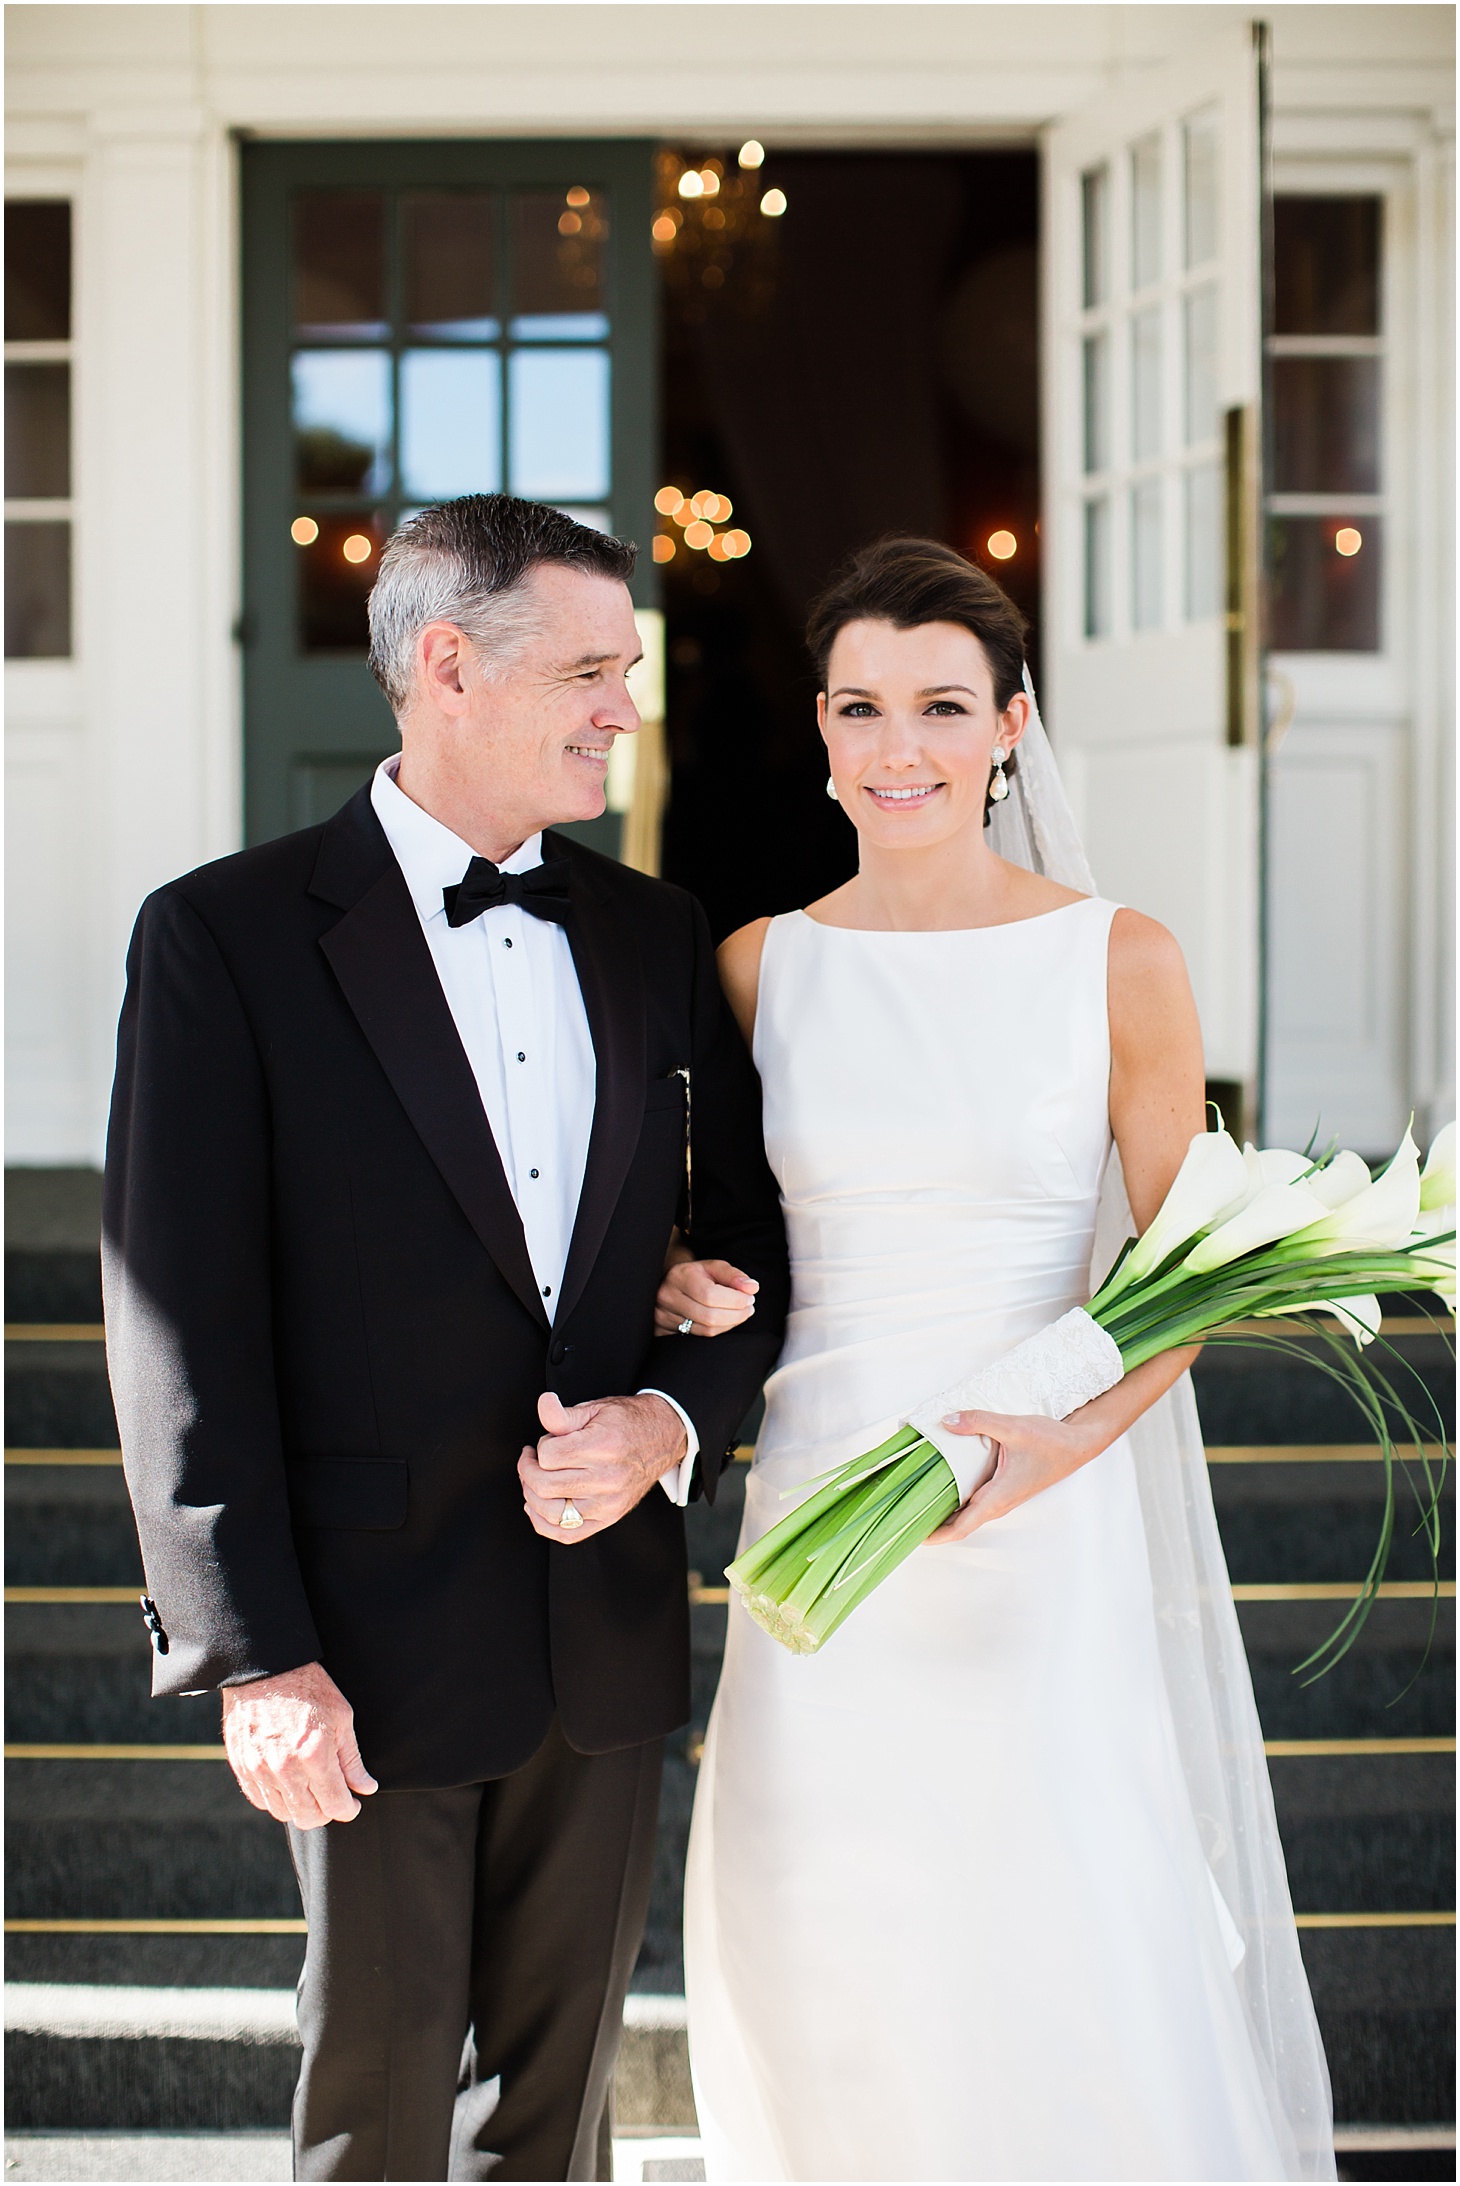 Father-Daughter First Look at the Columbia Country Club | Wedding Ceremony at Cathedral of St. Matthew the Apostle | Classy October Wedding in Washington, D.C. | Sarah Bradshaw Photography